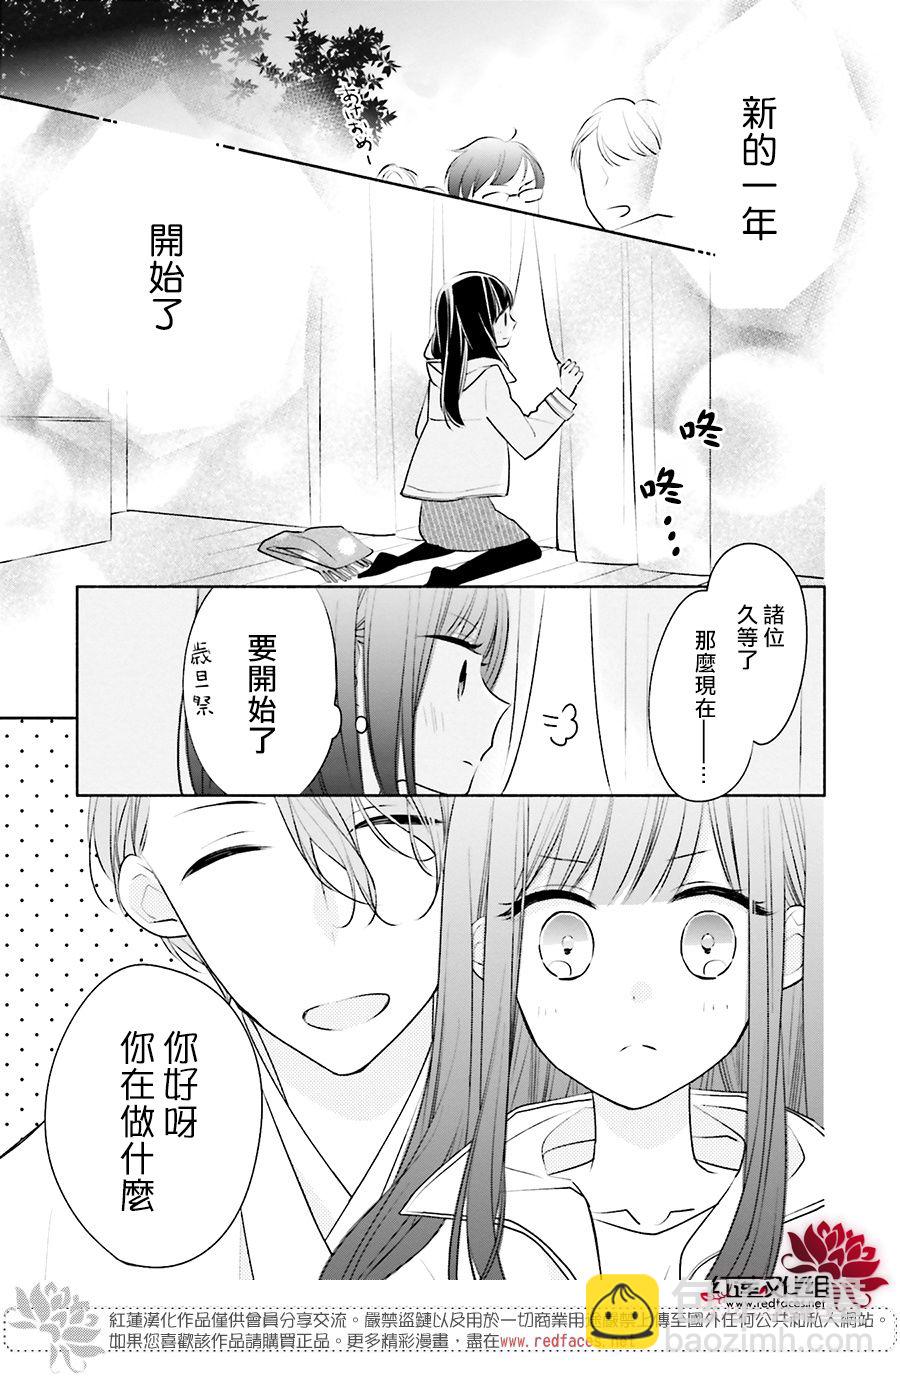 If given a second chance - 24話 - 1